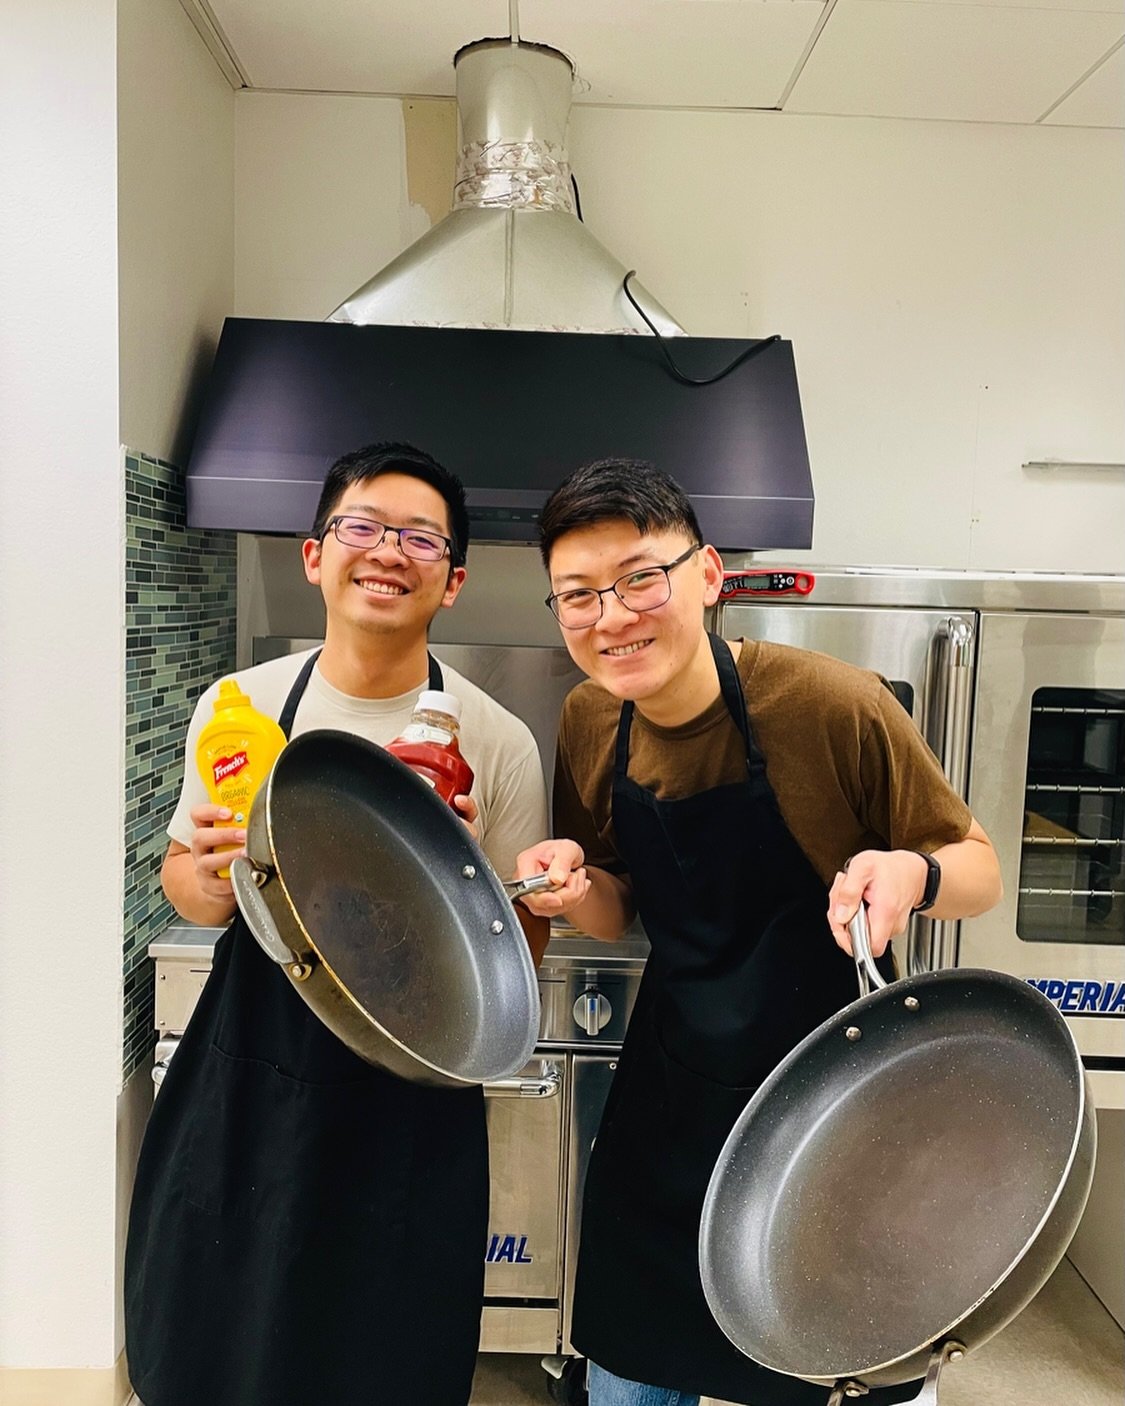 We are having a fun bro&rsquo;s night with GIANT burgers and ping pong! 🍔 What more can you ask for? 

Join us this Friday @7p, DM for rides~ 

#Internationalstudents #ucsdinternational #ucsdundergrad #burgers #giantburger #brosnight #pingpong #ucsd